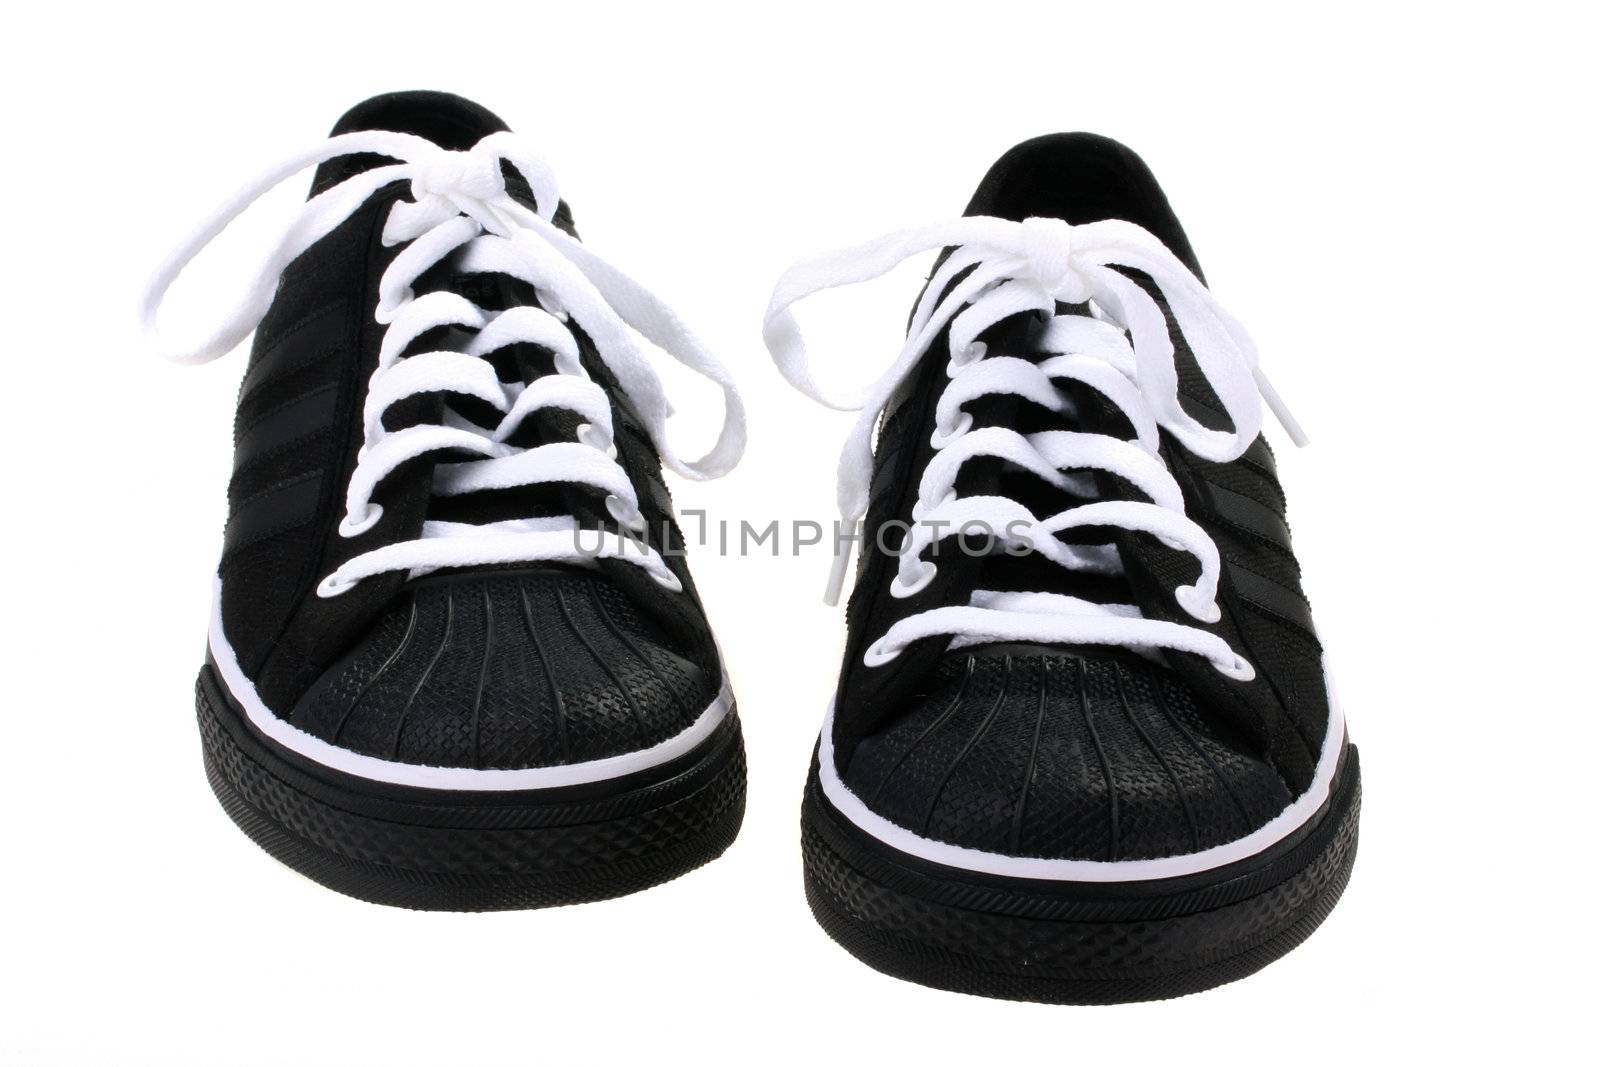 Easy footwear for playing sports with white laces.